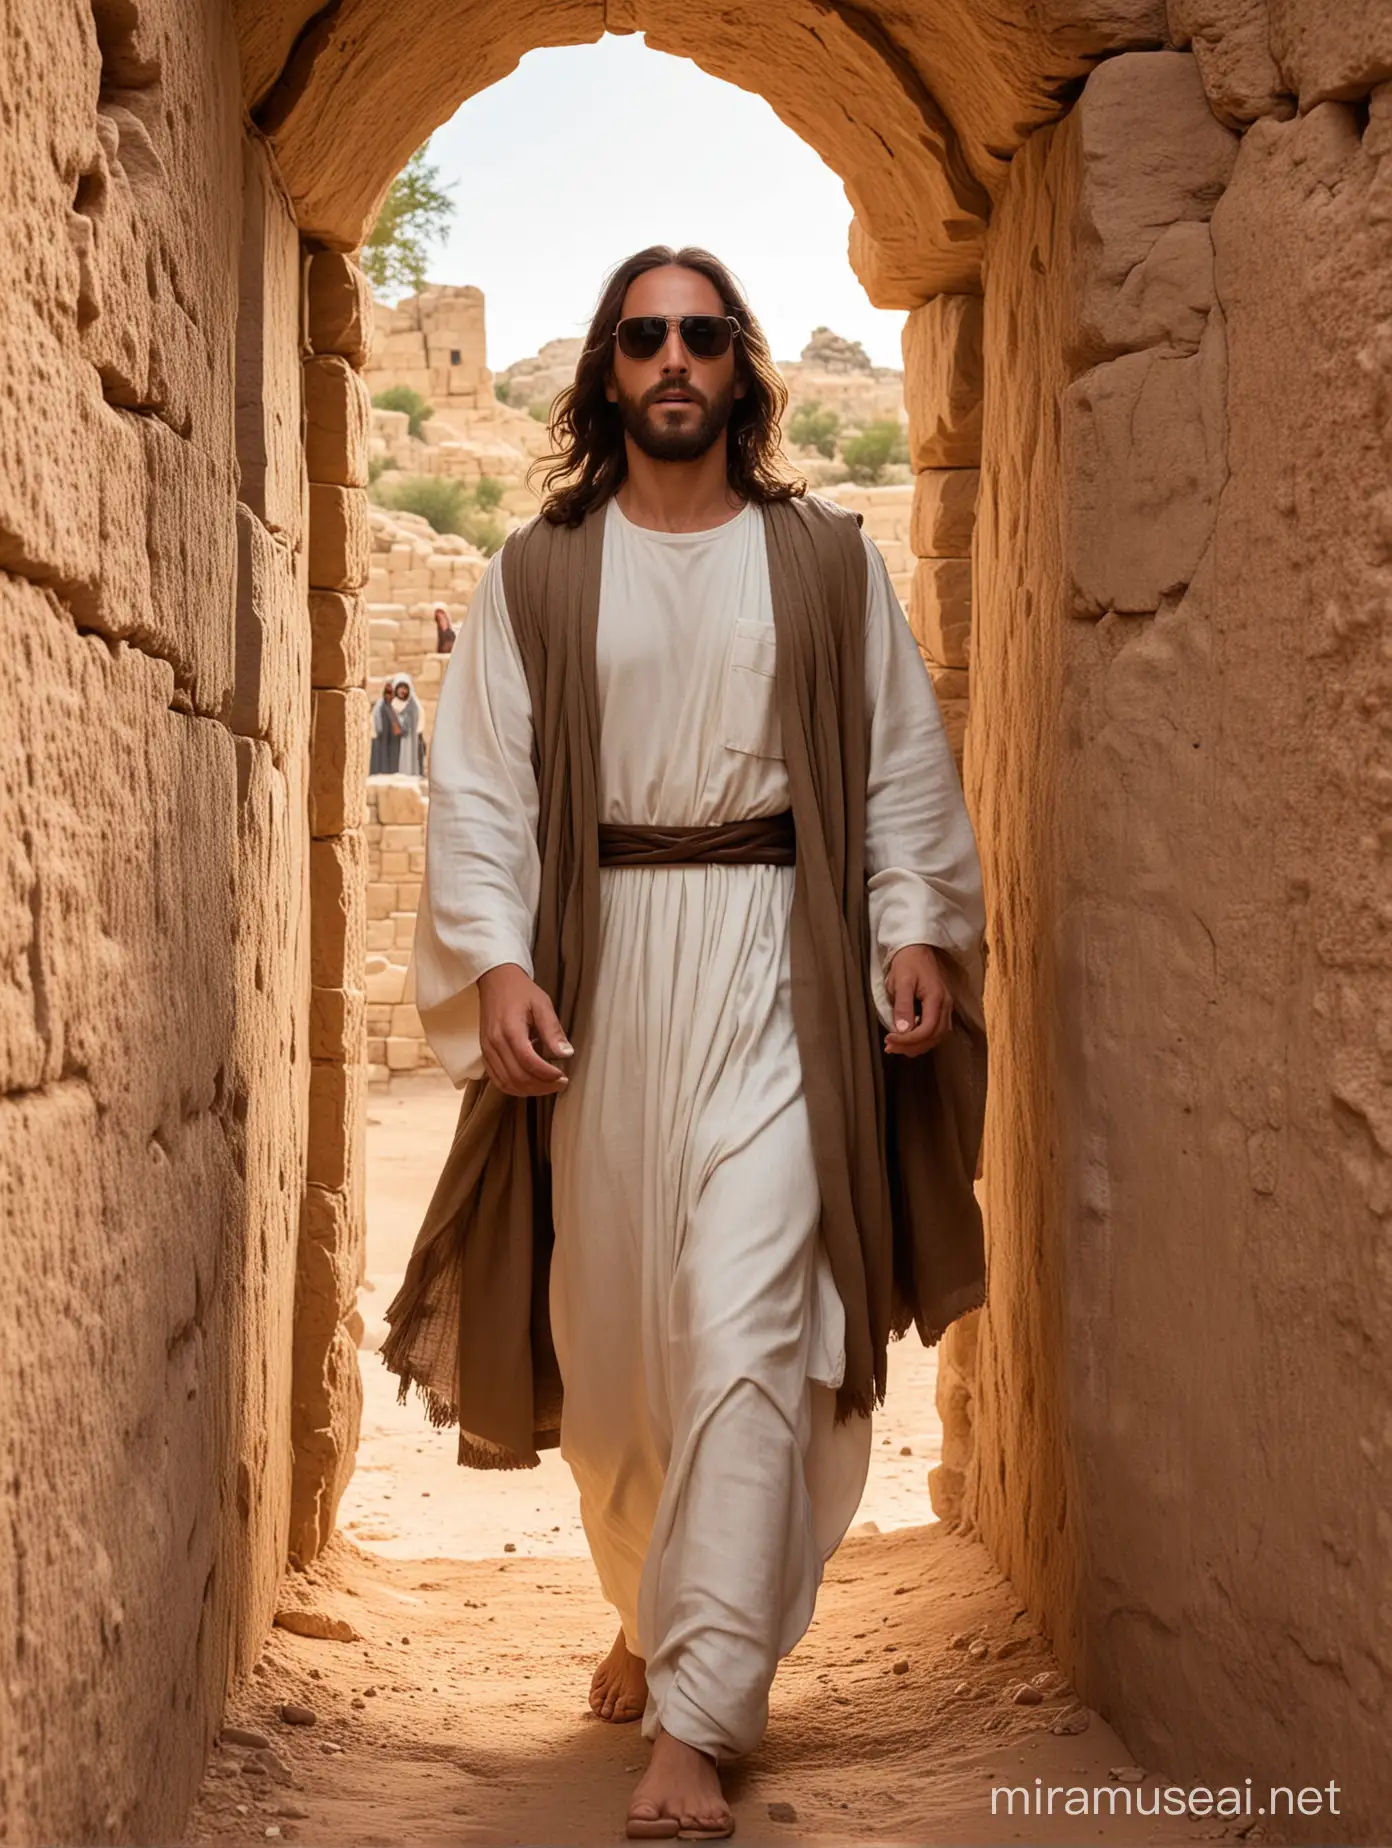 Resurrected Jesus in Sunglasses Striding Out of Tomb